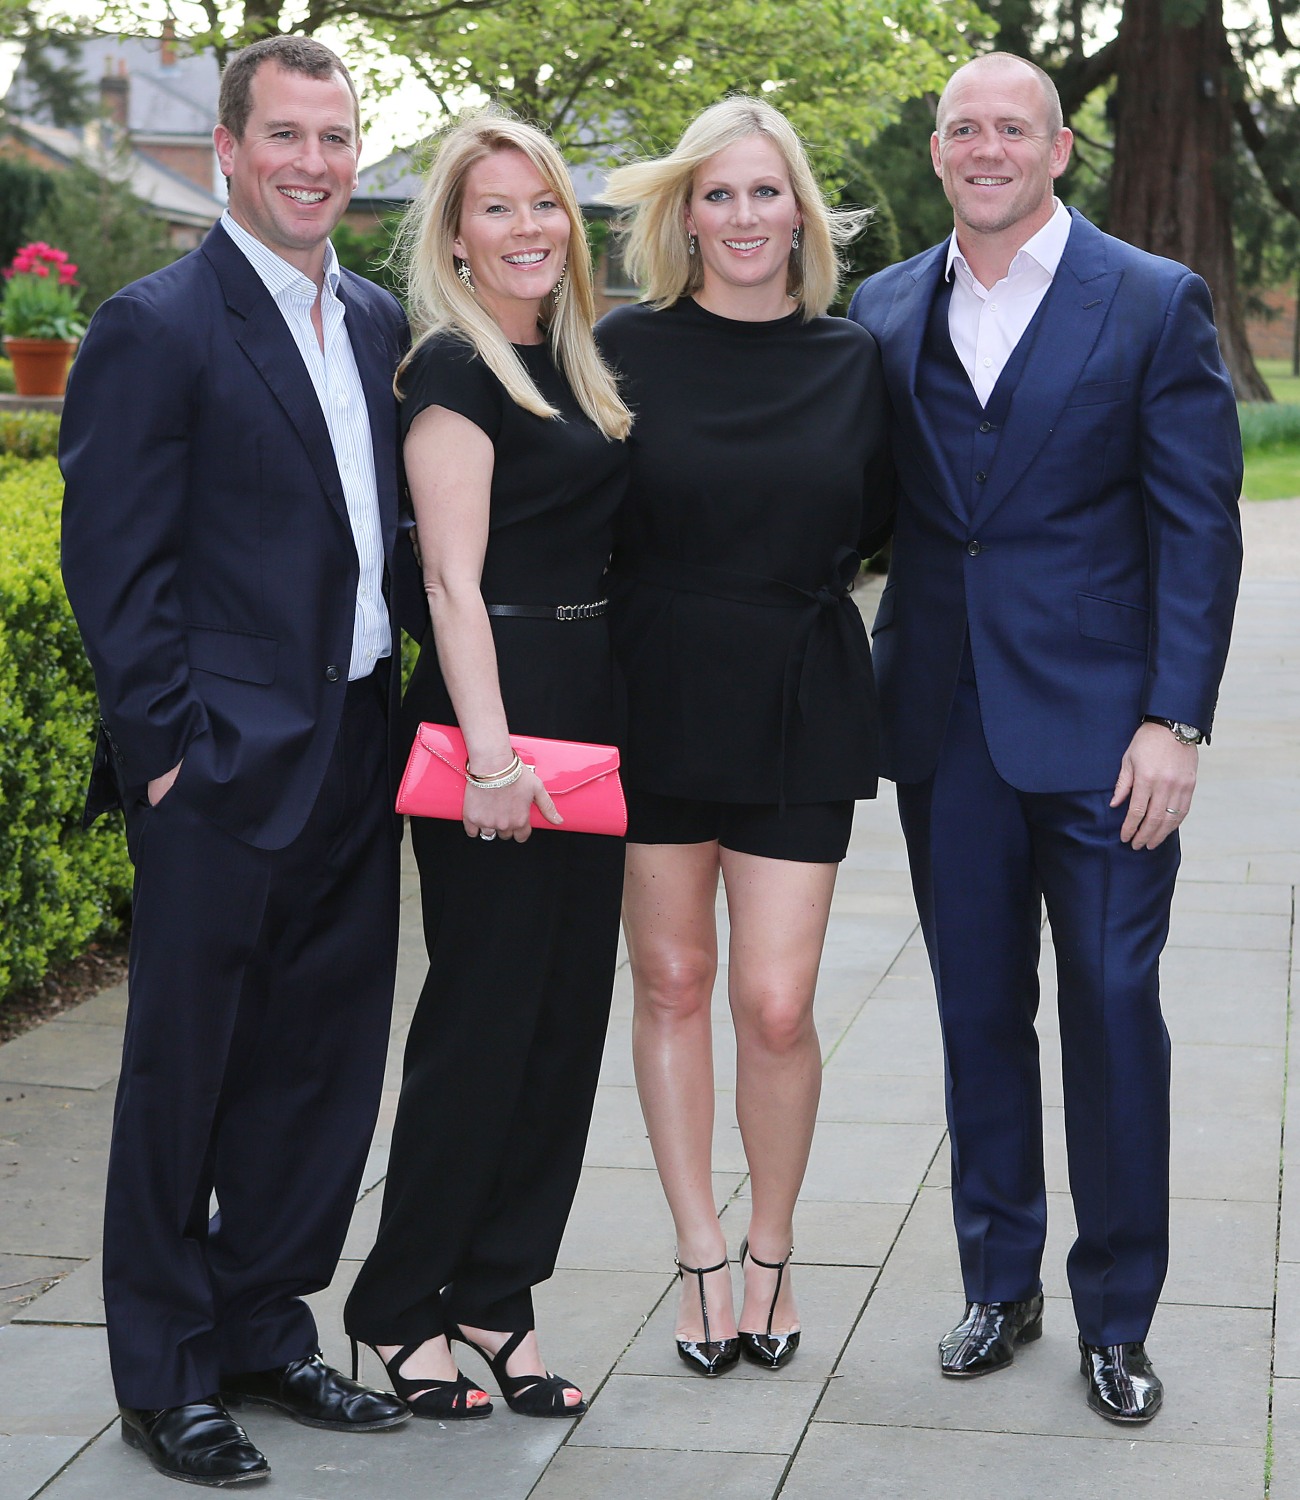 The ISPS Handa Mike Tindall 3rd Annual Celebrity Golf Classic